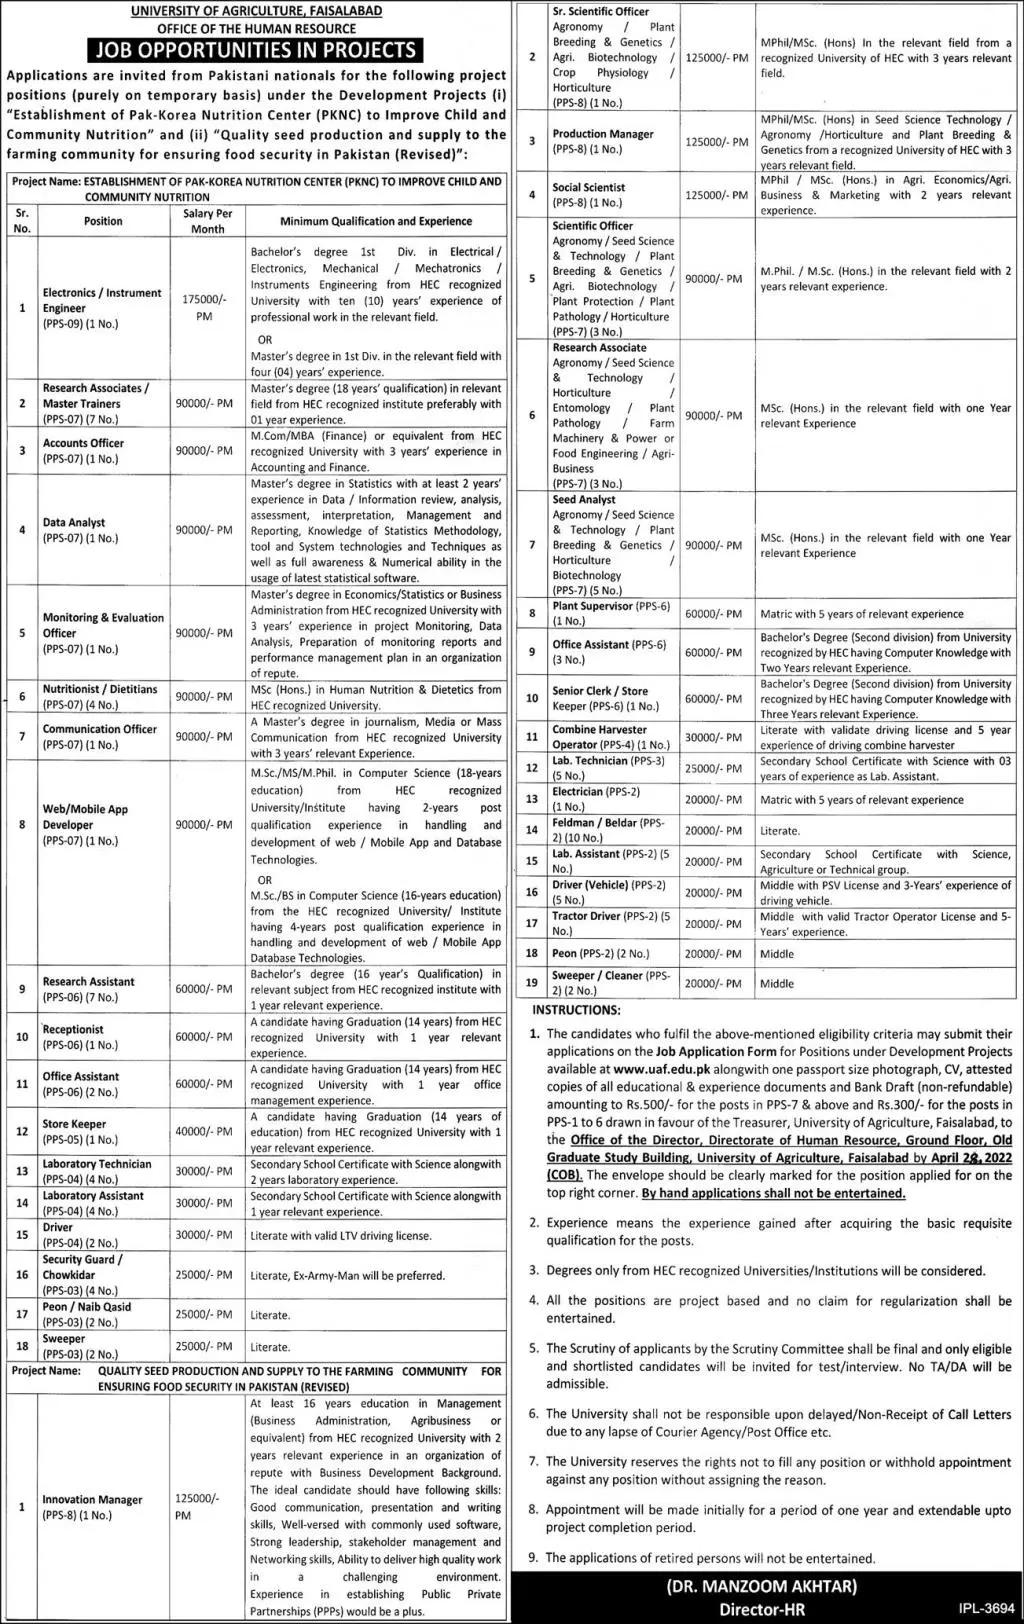 University of Agriculture Faisalabad Jobs 2022